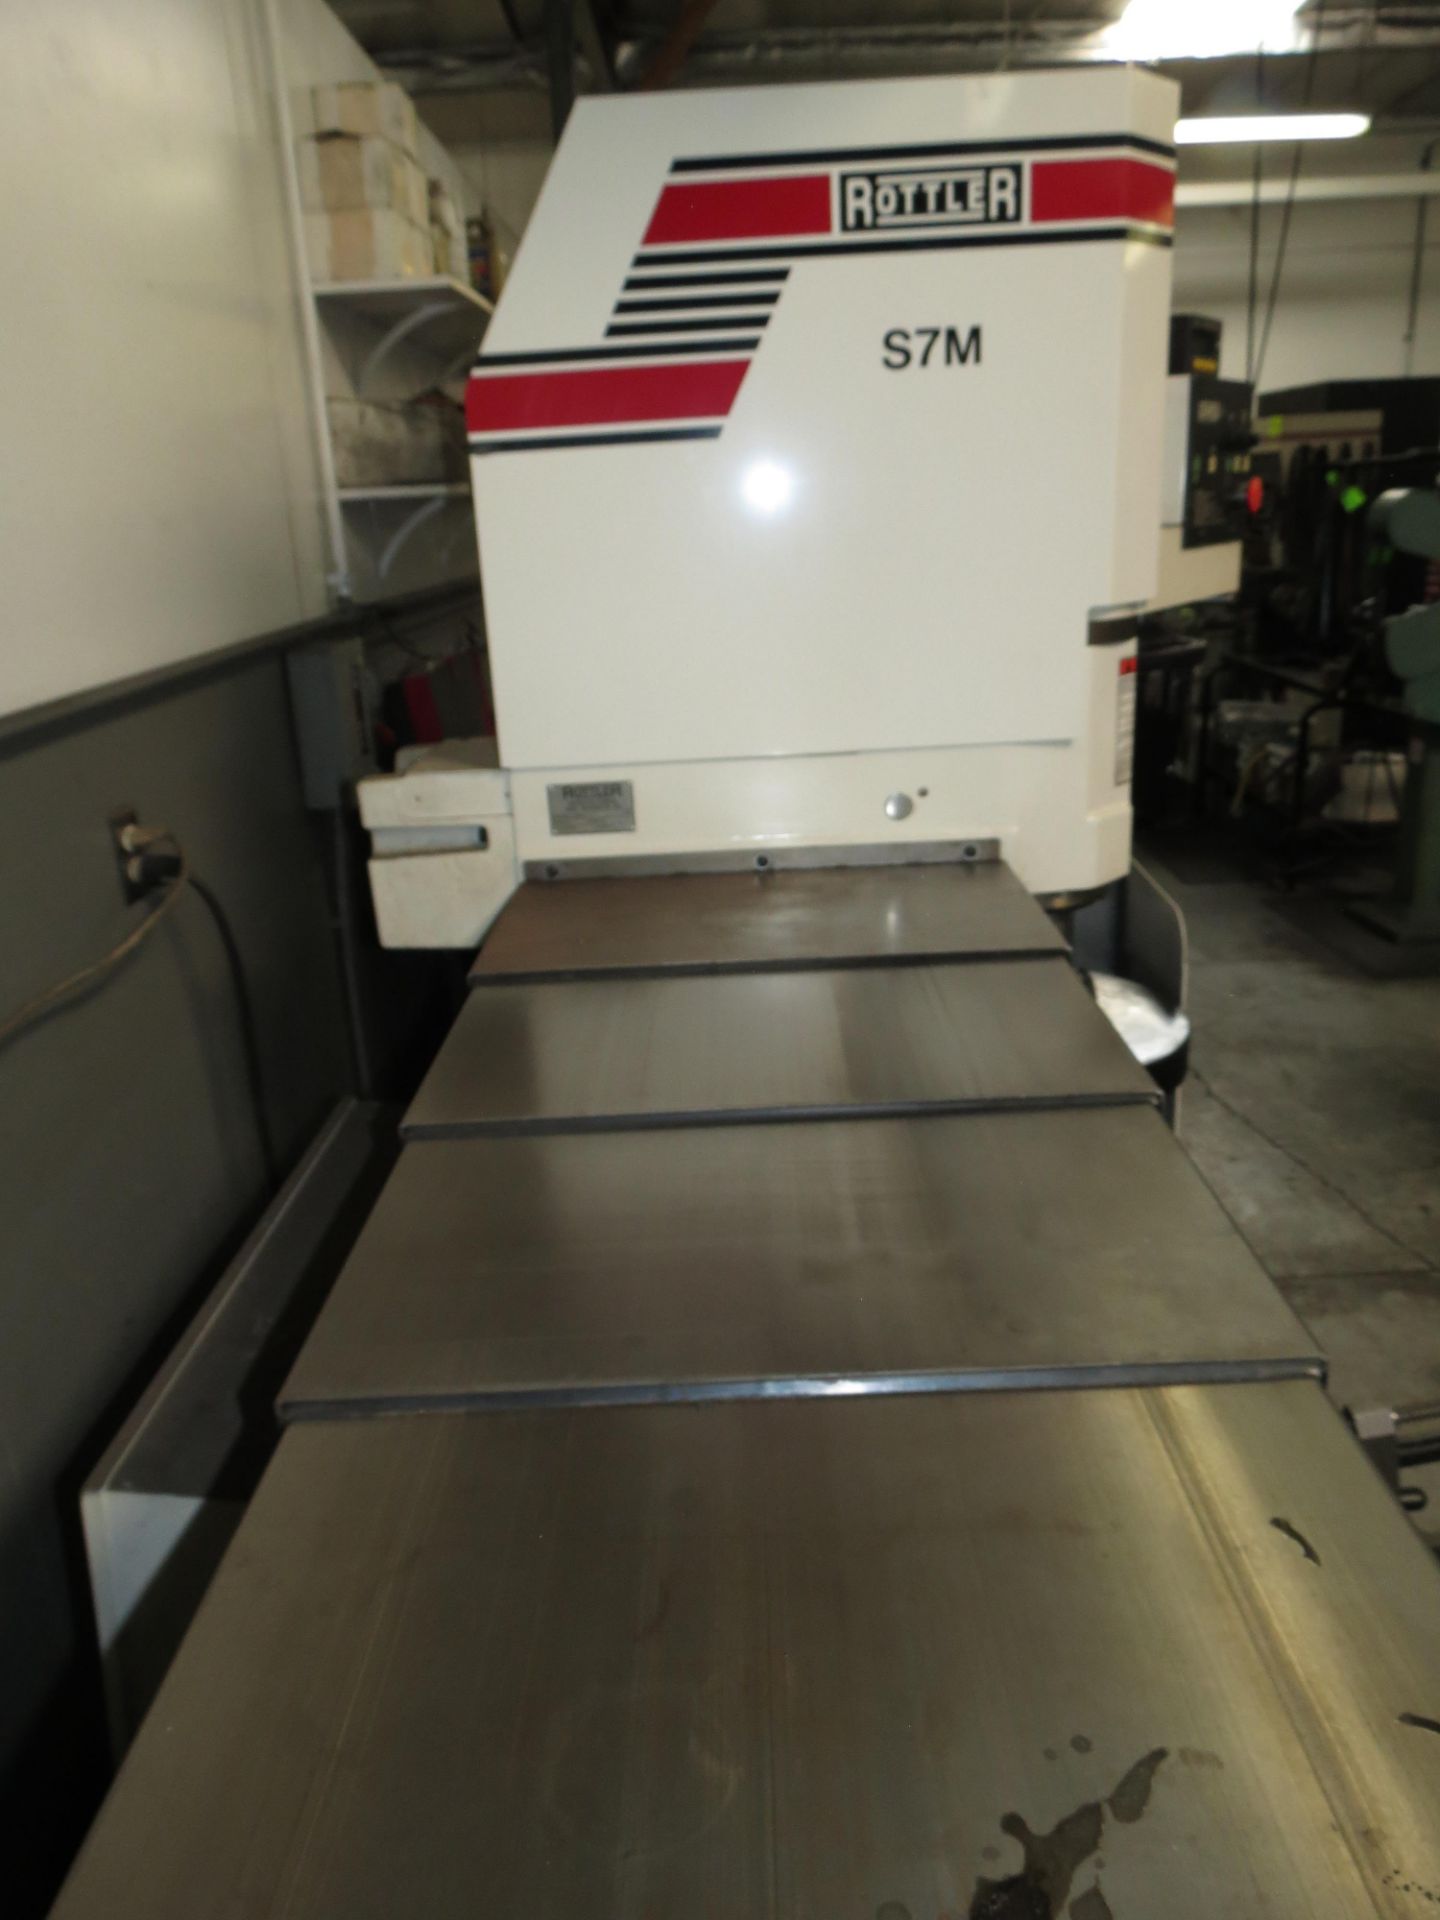 ROTTLER S7M CBM CYLINDER HEAD AND BLOCK SURFACER, WITH UPGRADED 15" X 30" X 2" TILT TABLE - Image 8 of 10